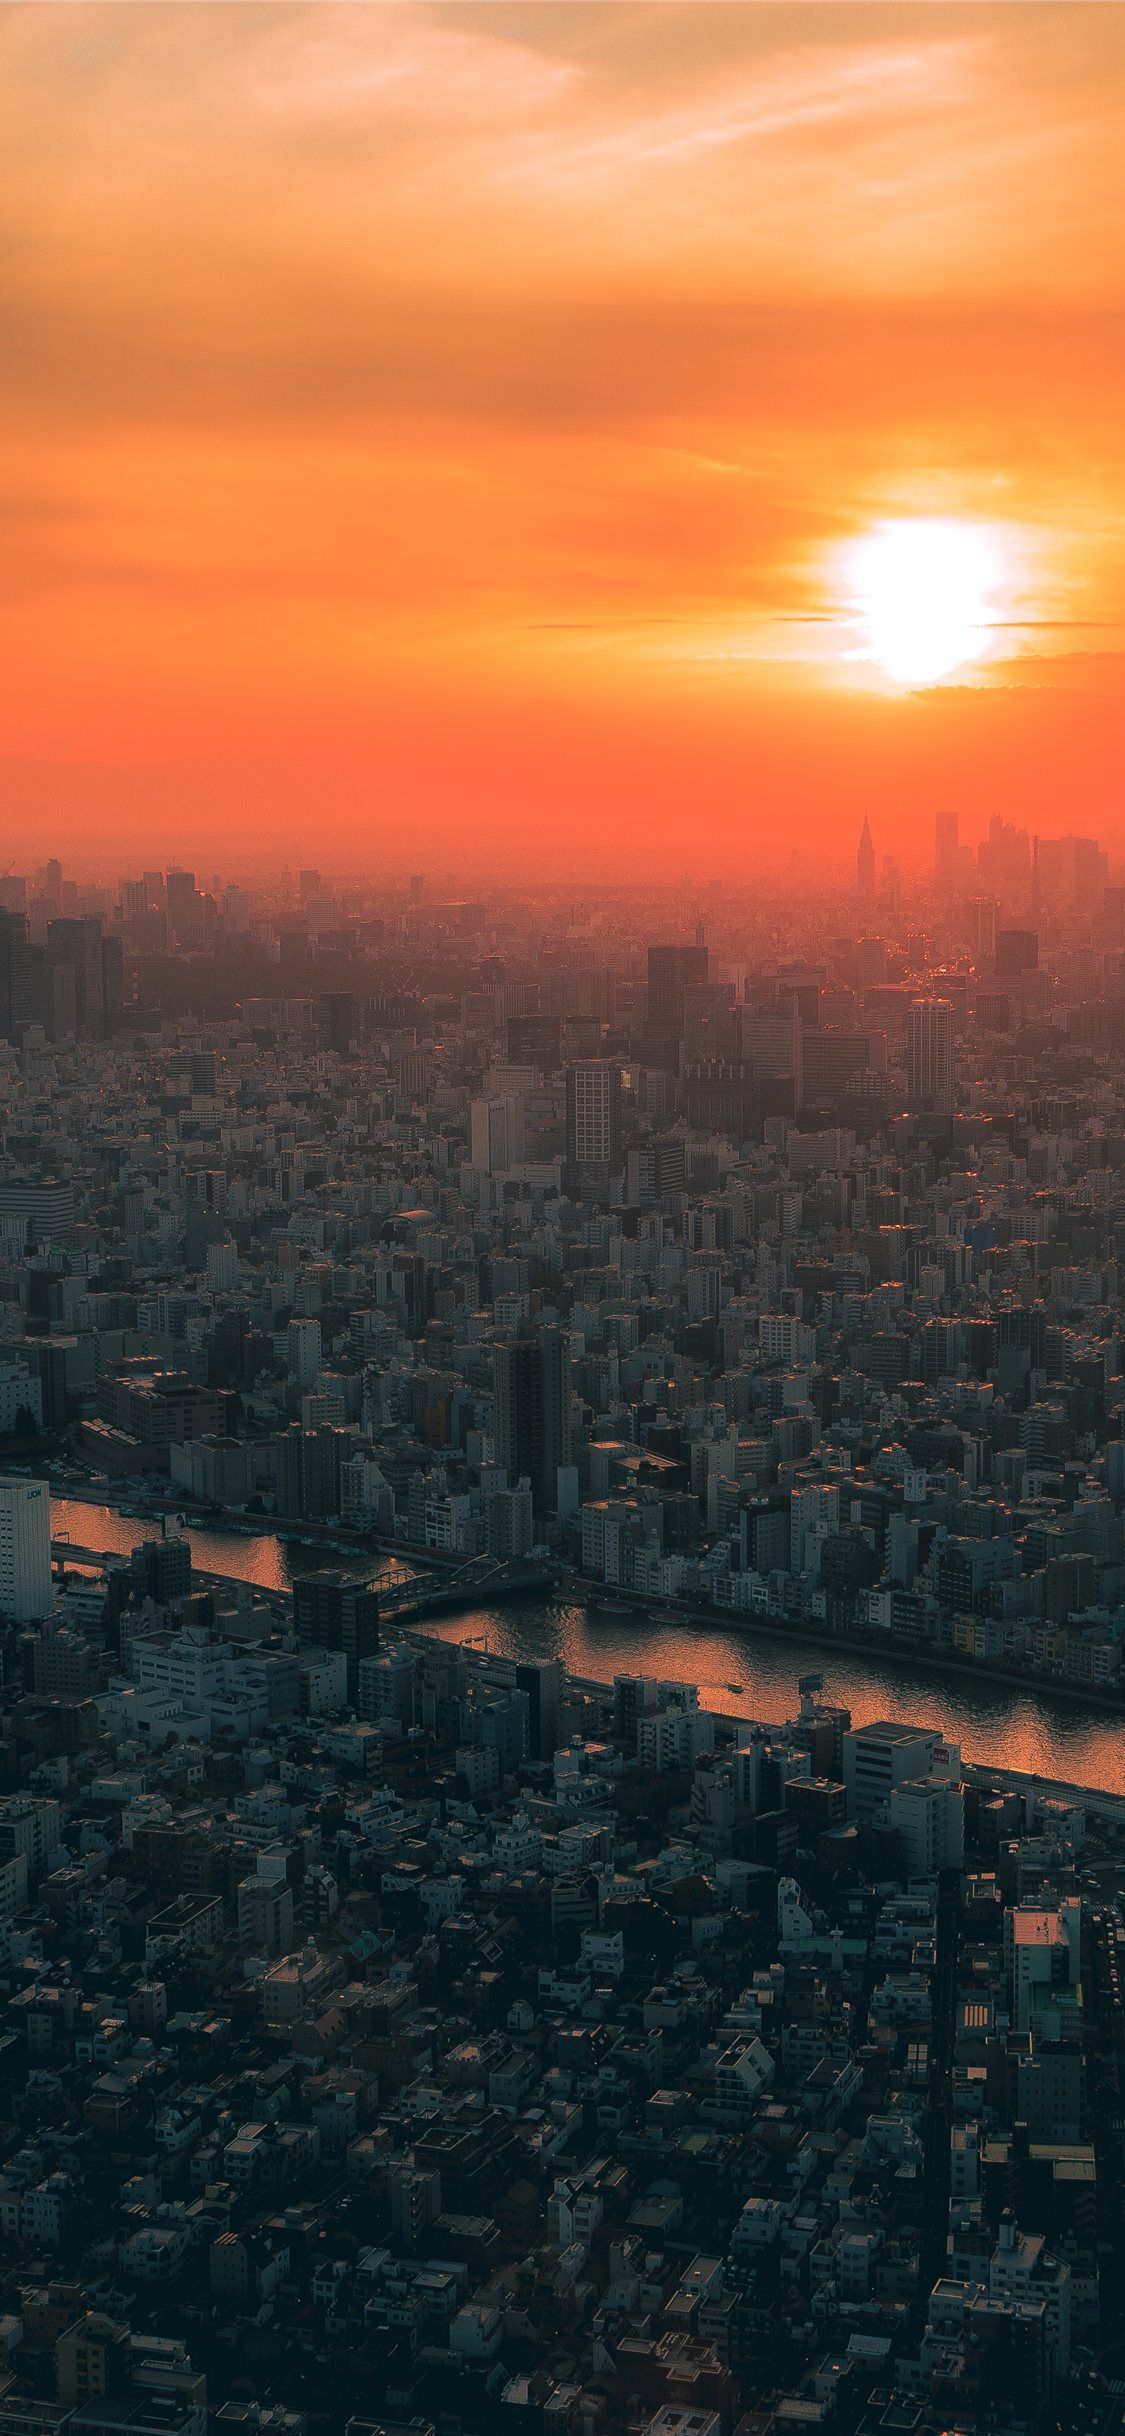 Cityscape at sunset, with orange and red hues in the sky - Tokyo, city